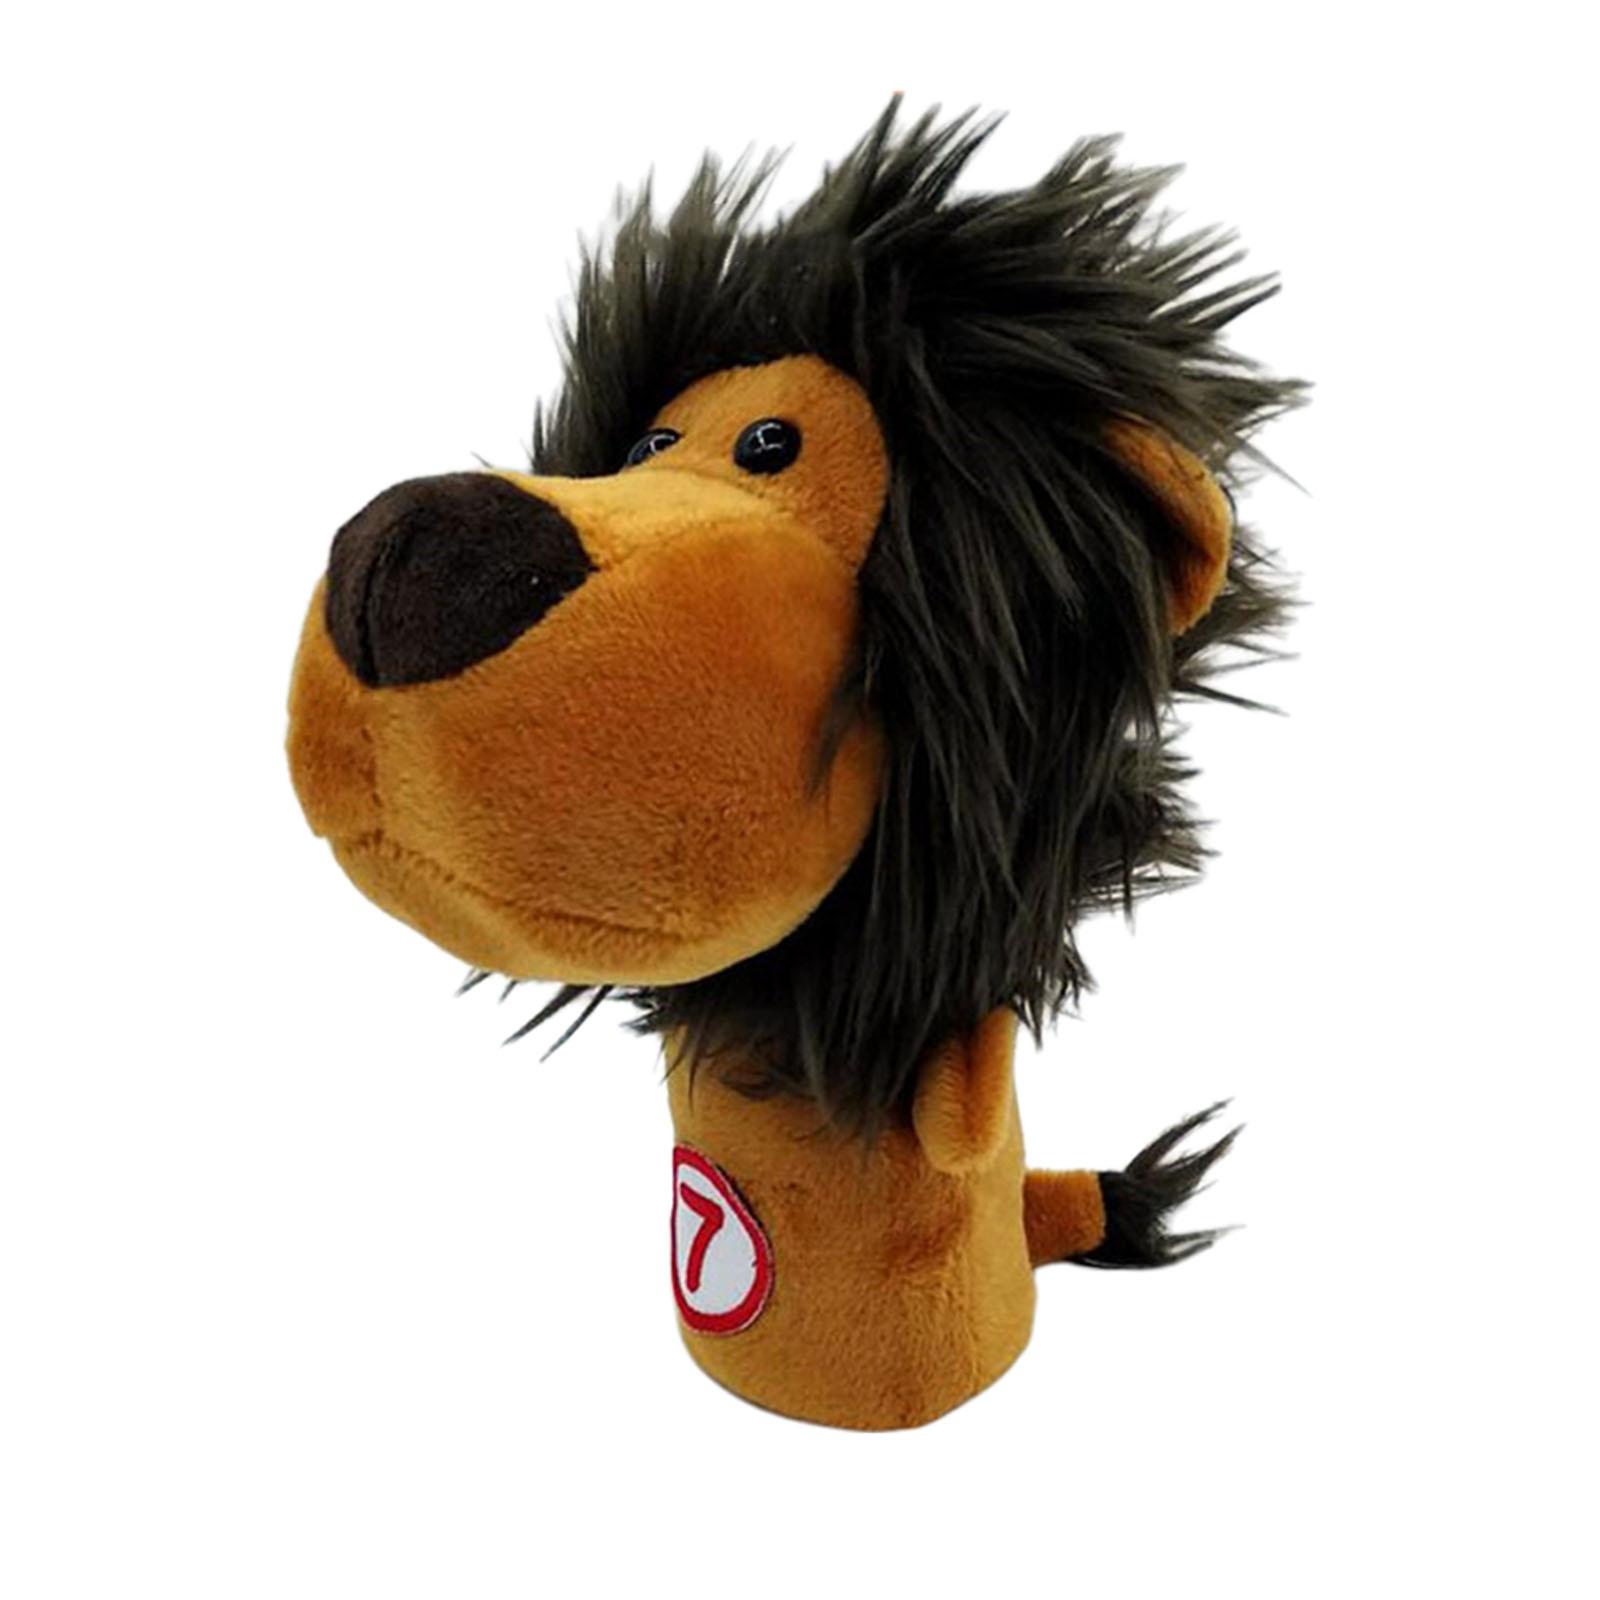 Novelty Plush Animal Golf Iron Headcover Wedges Club Head Cover Lion No.7